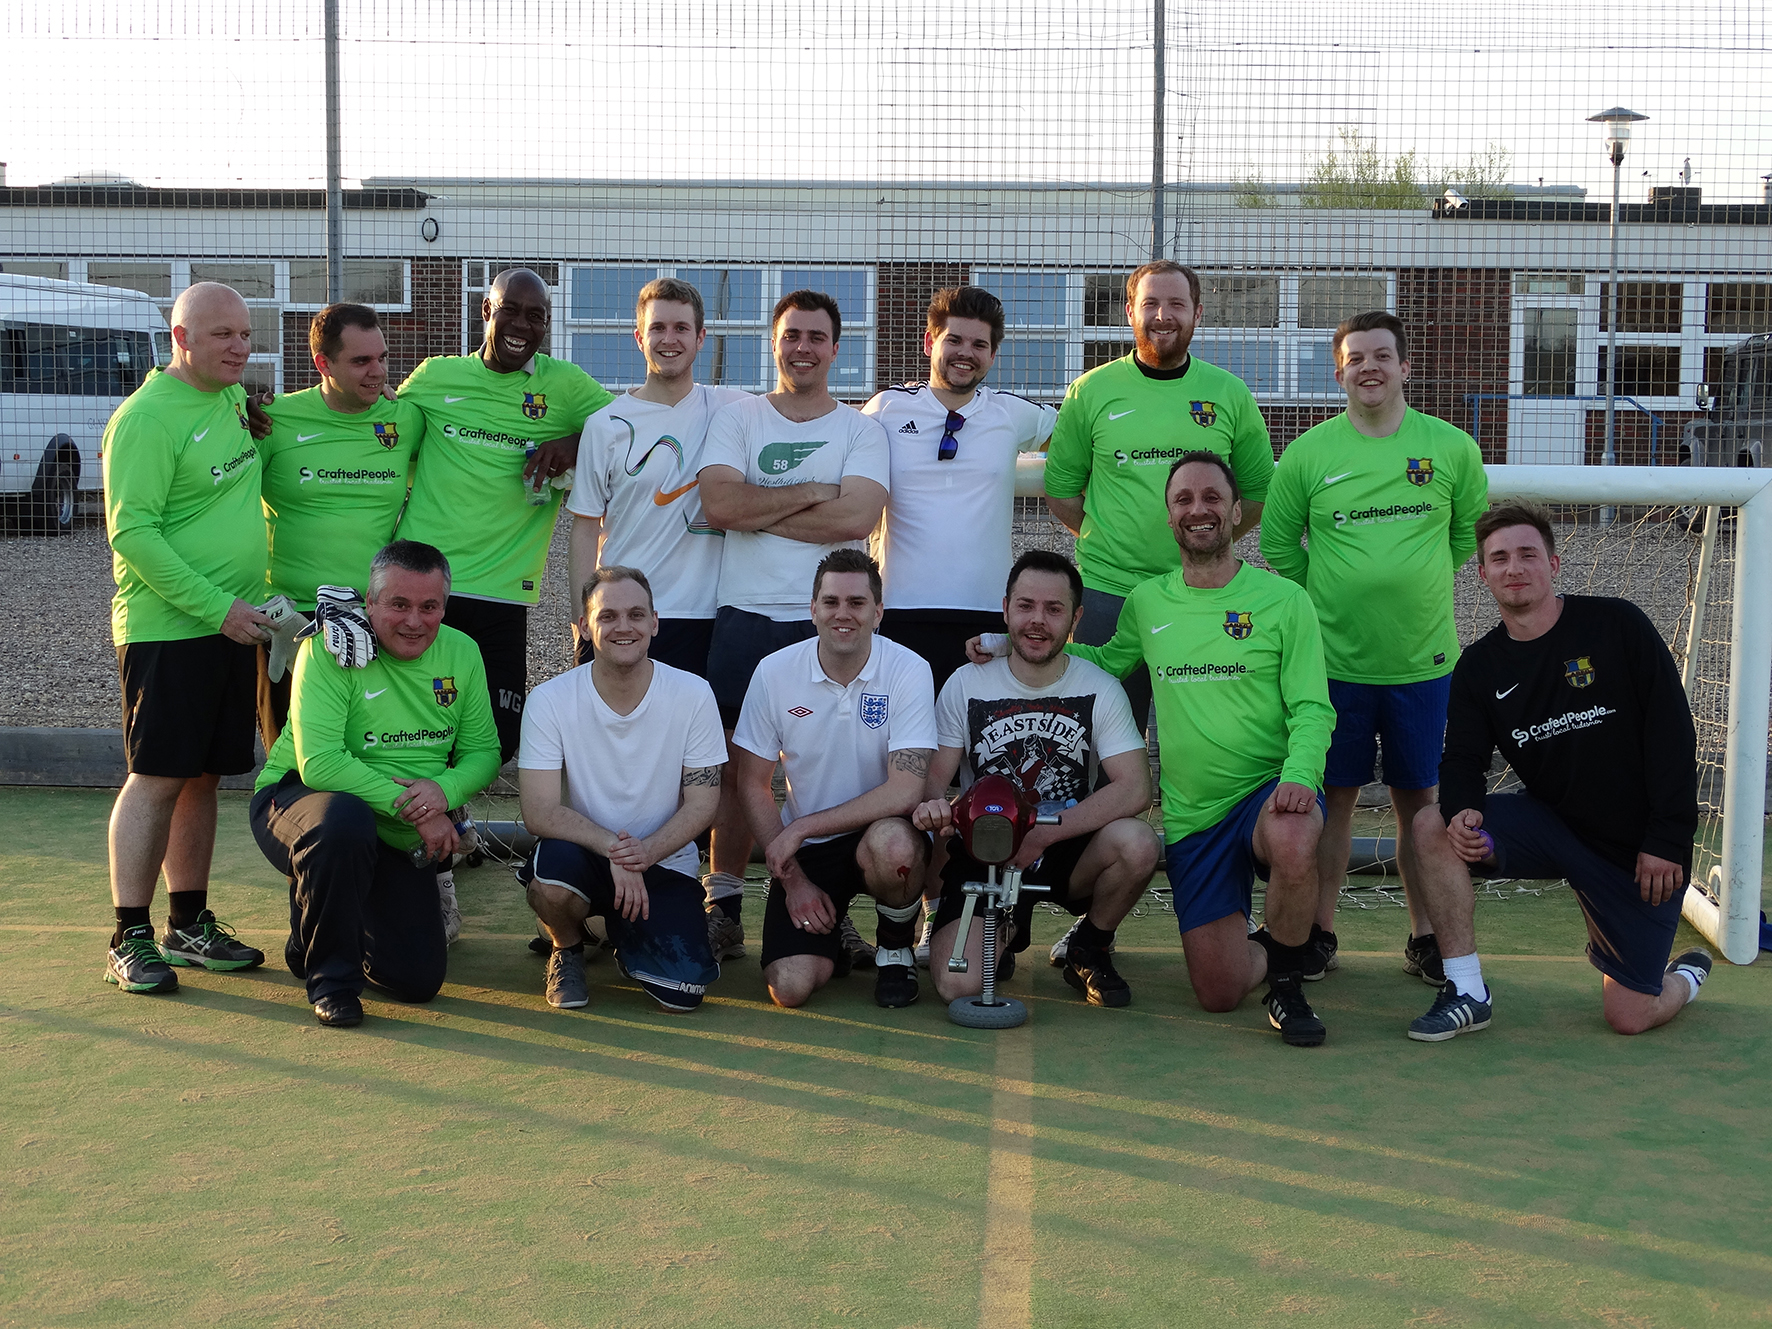 TGA Annual Football Match Delivers Resounding Win for Sales